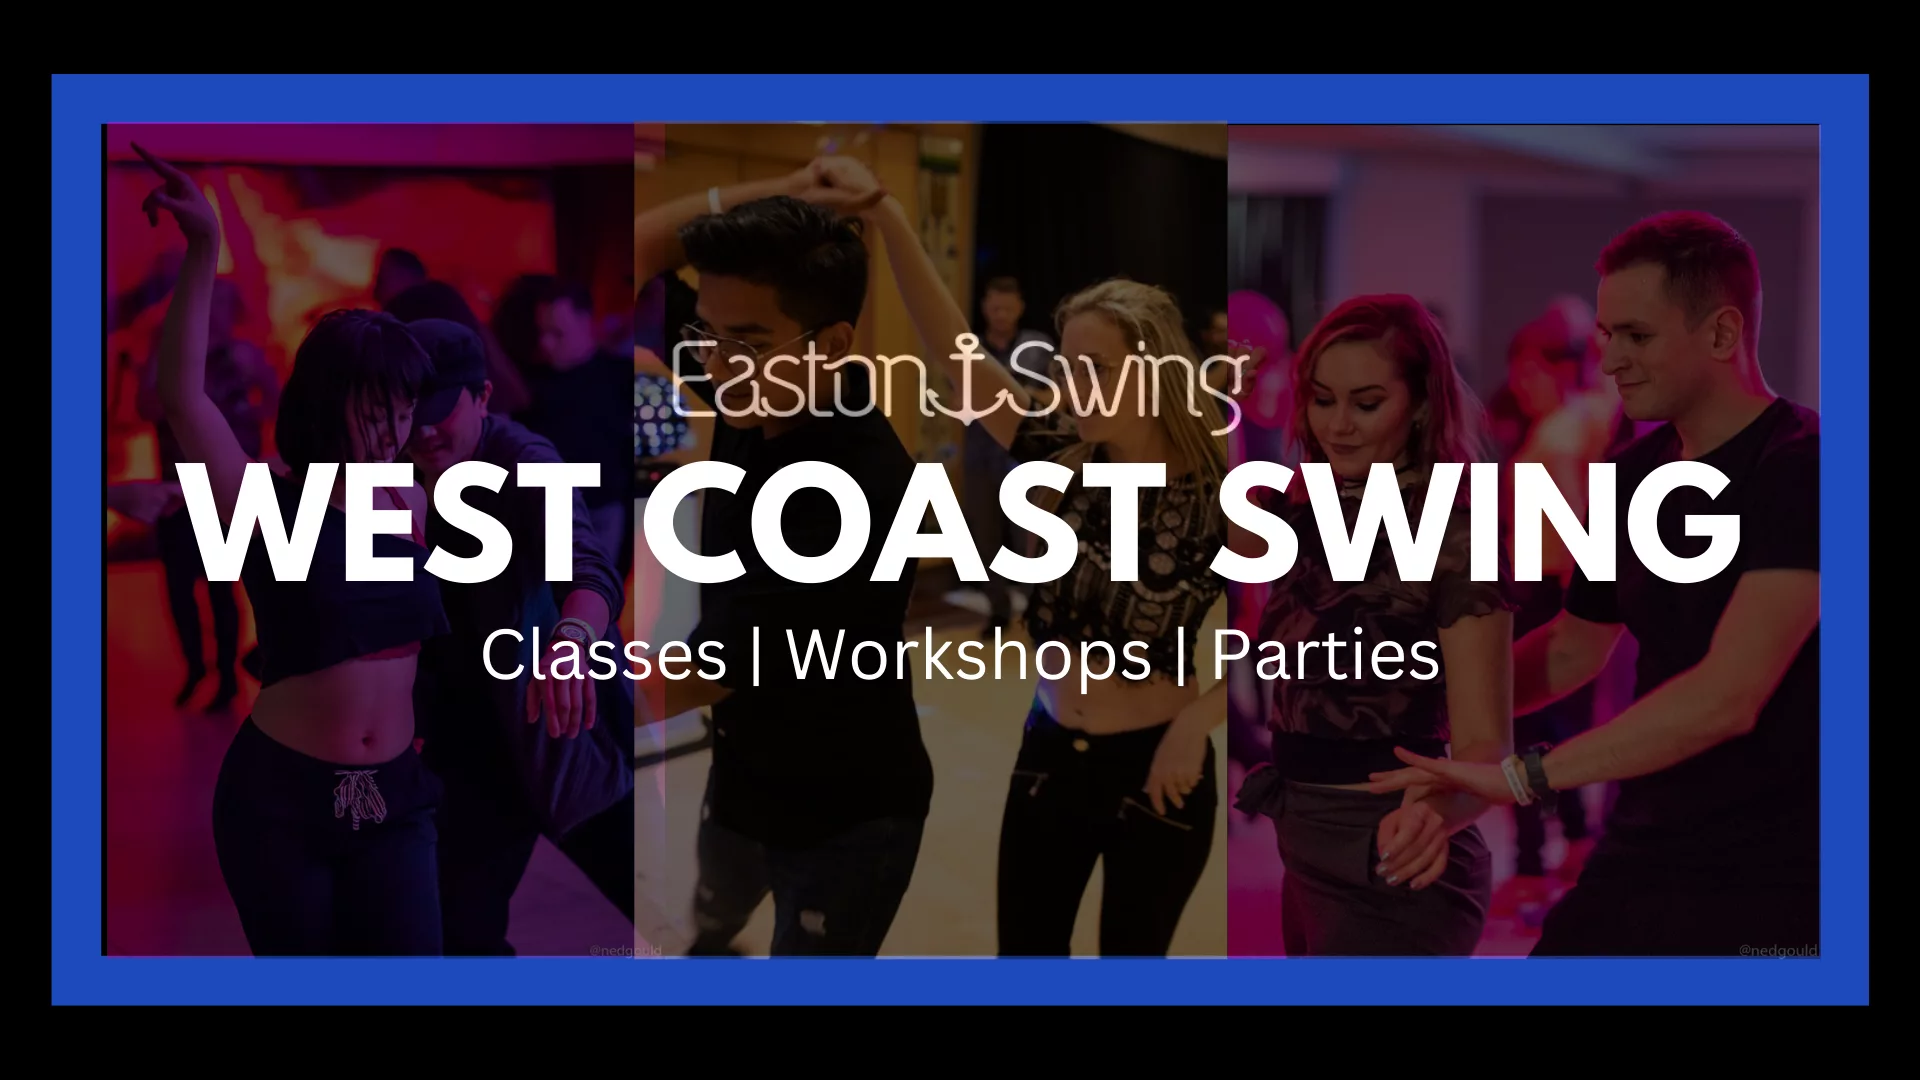 West Coast Swing dancers having fun with white emboldened text displaying company logo. West Coast Swing Crew.